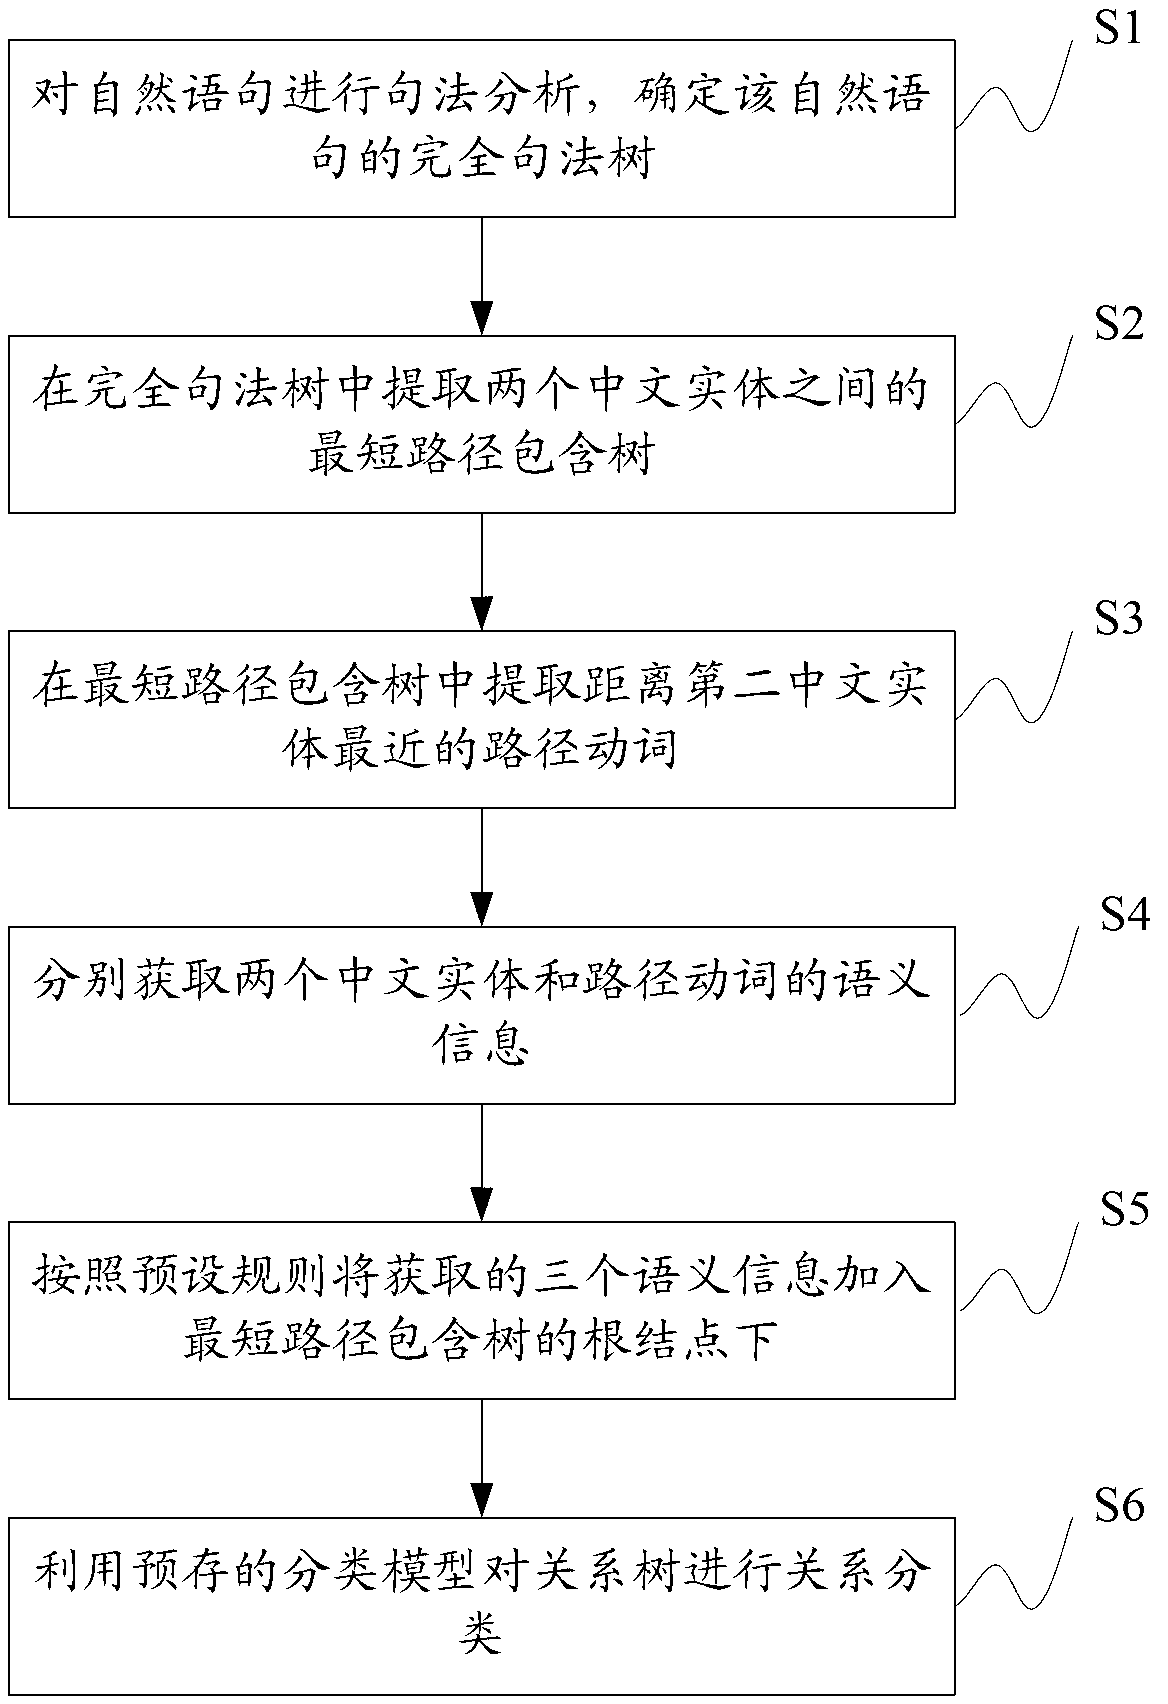 Extraction method of semantic relation between Chinese entities